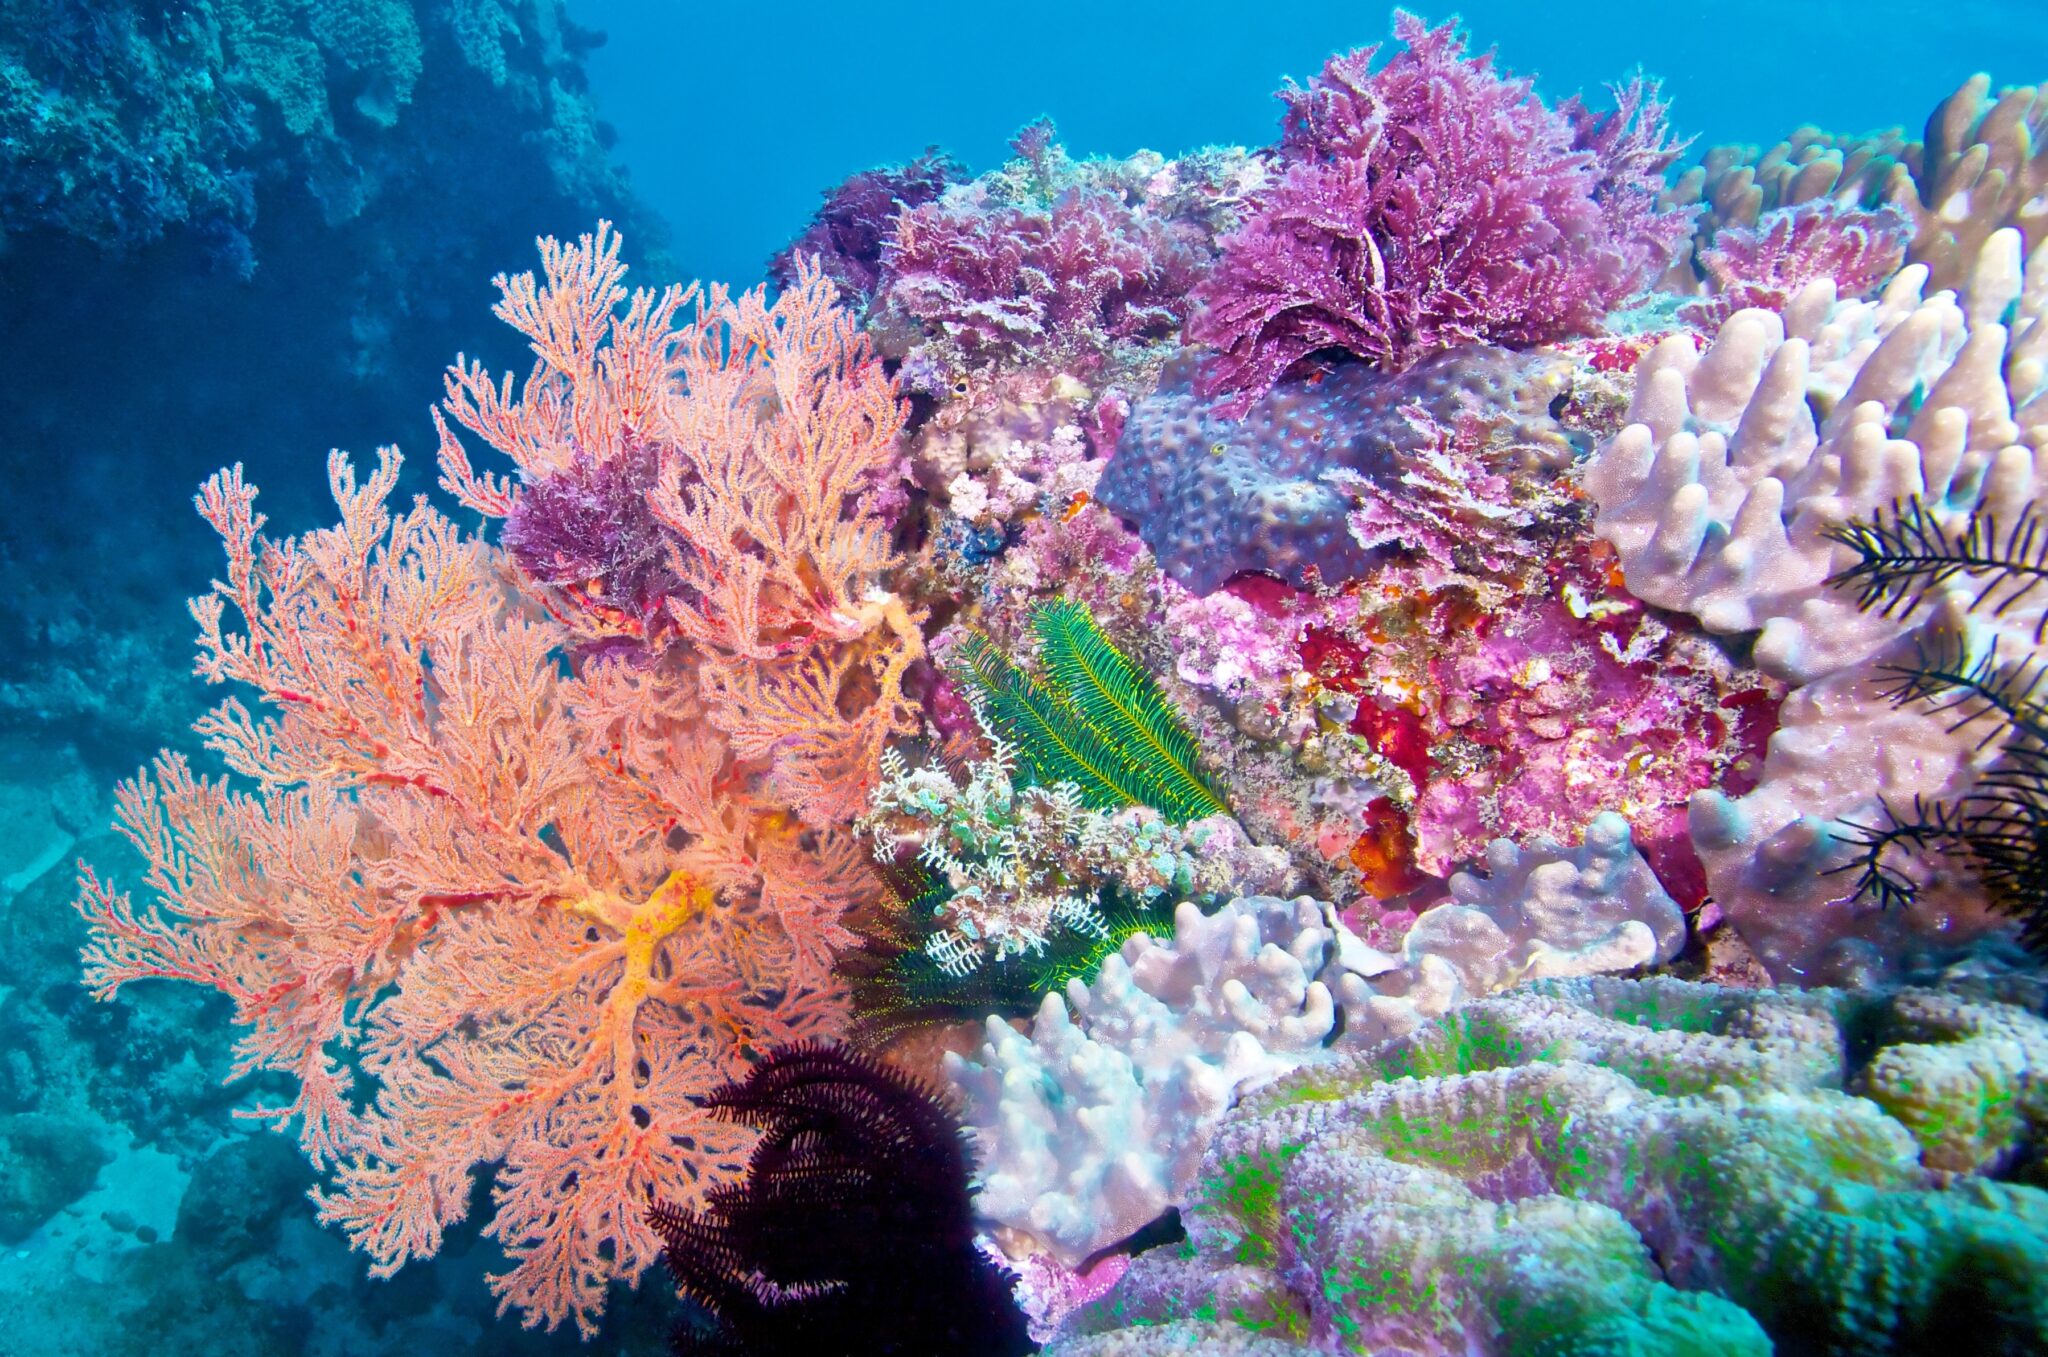 freediving and discovering colorful soft corals in Green Island, Taiwan - one of the best diving destinations in East Asia